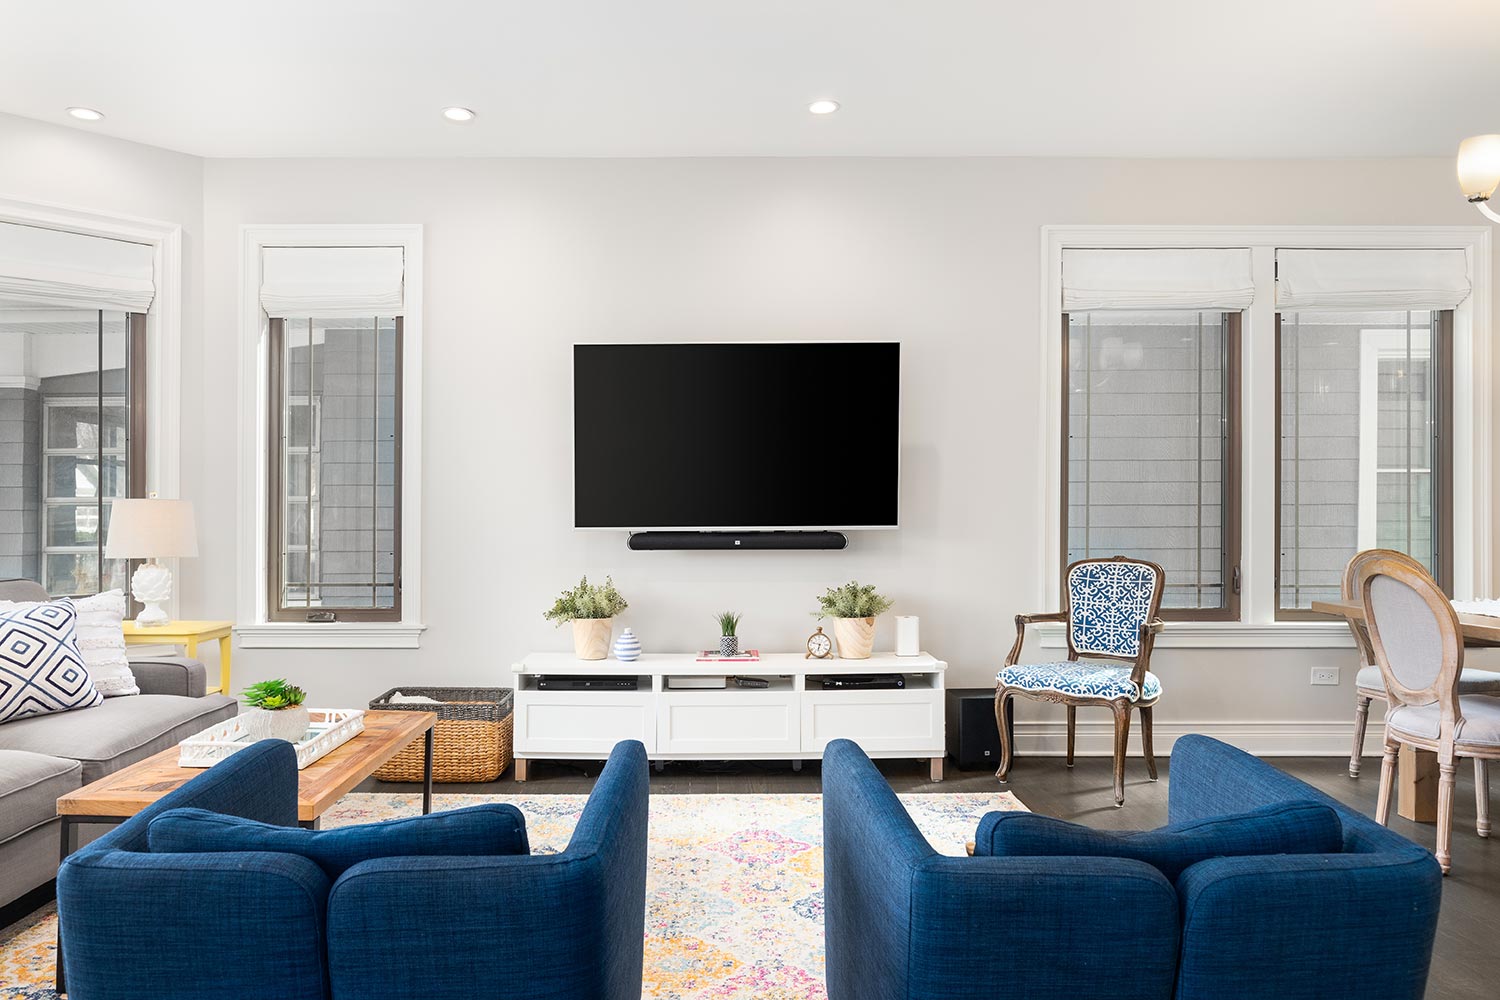 A cozy living room with blue chairs sitting in front of a mounted television